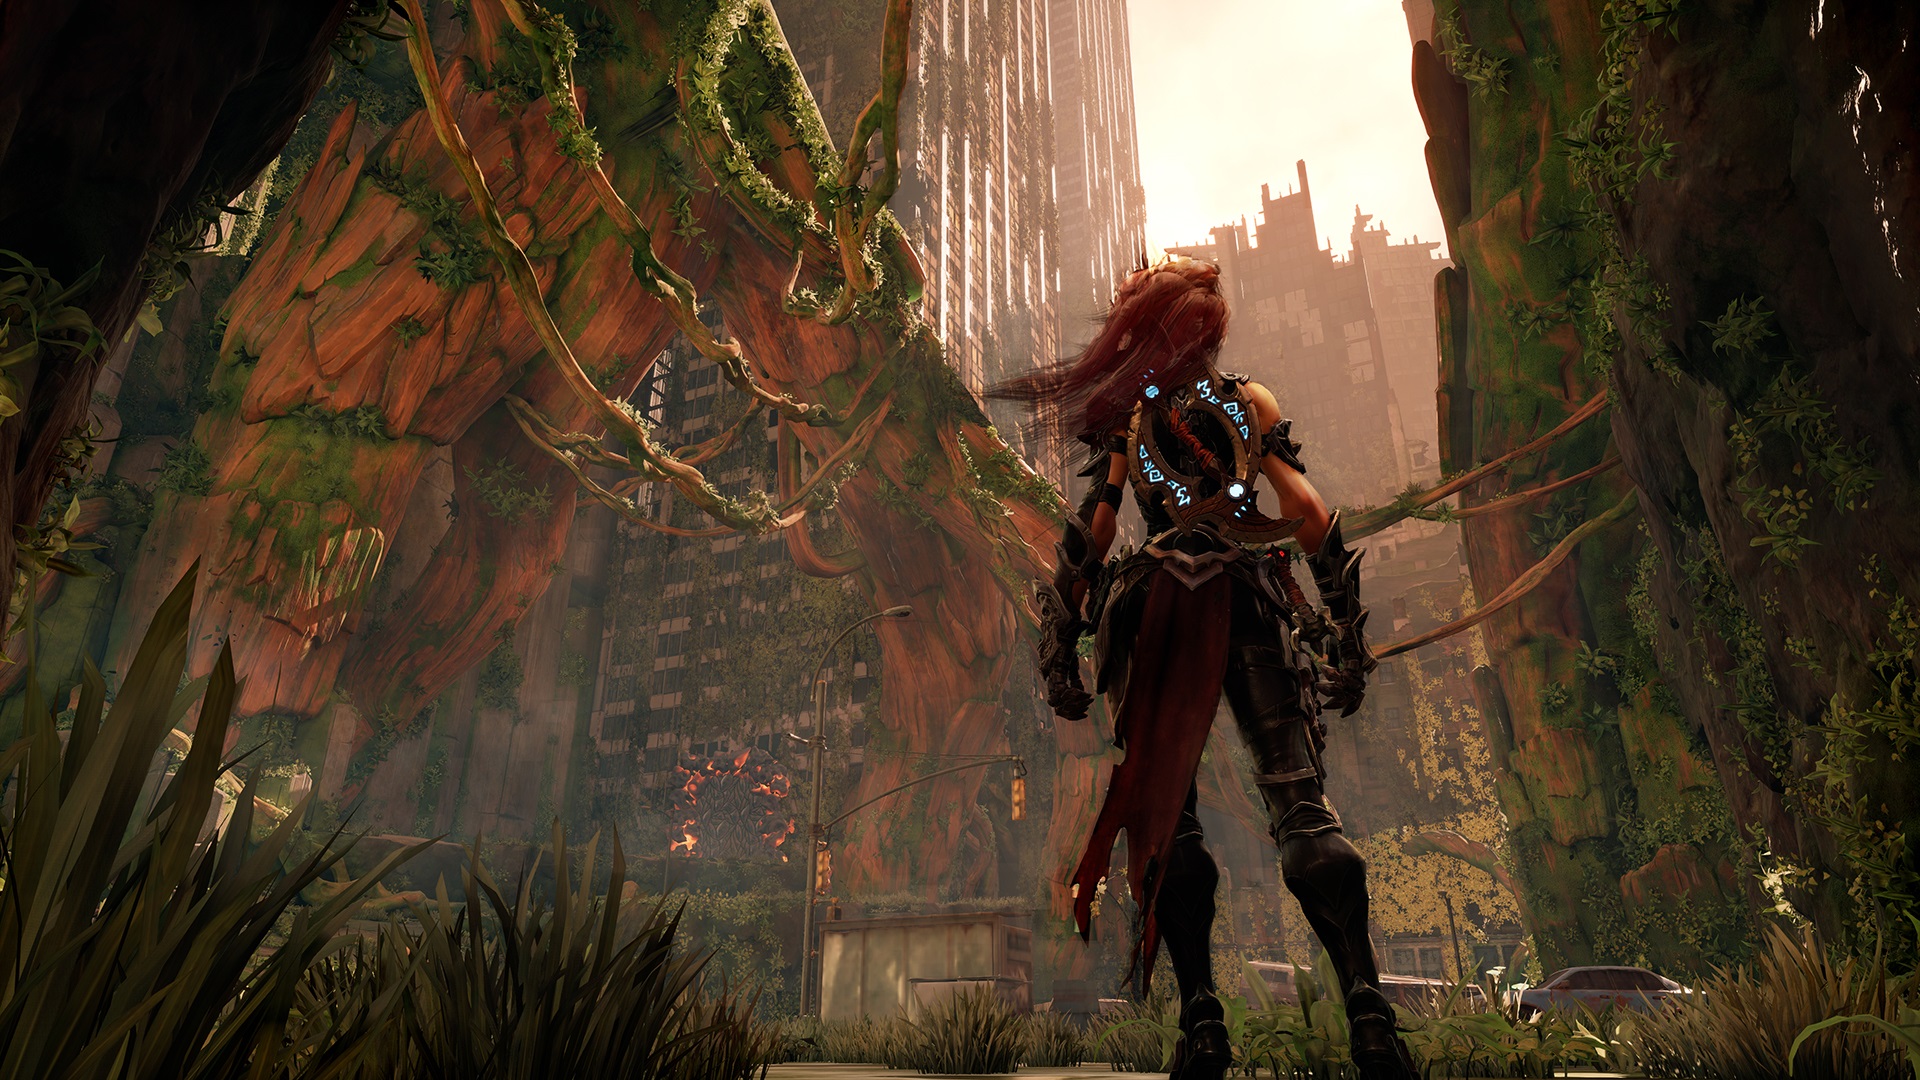 Darksiders 3 Officially Announced for PC, PS4, and Xbox One